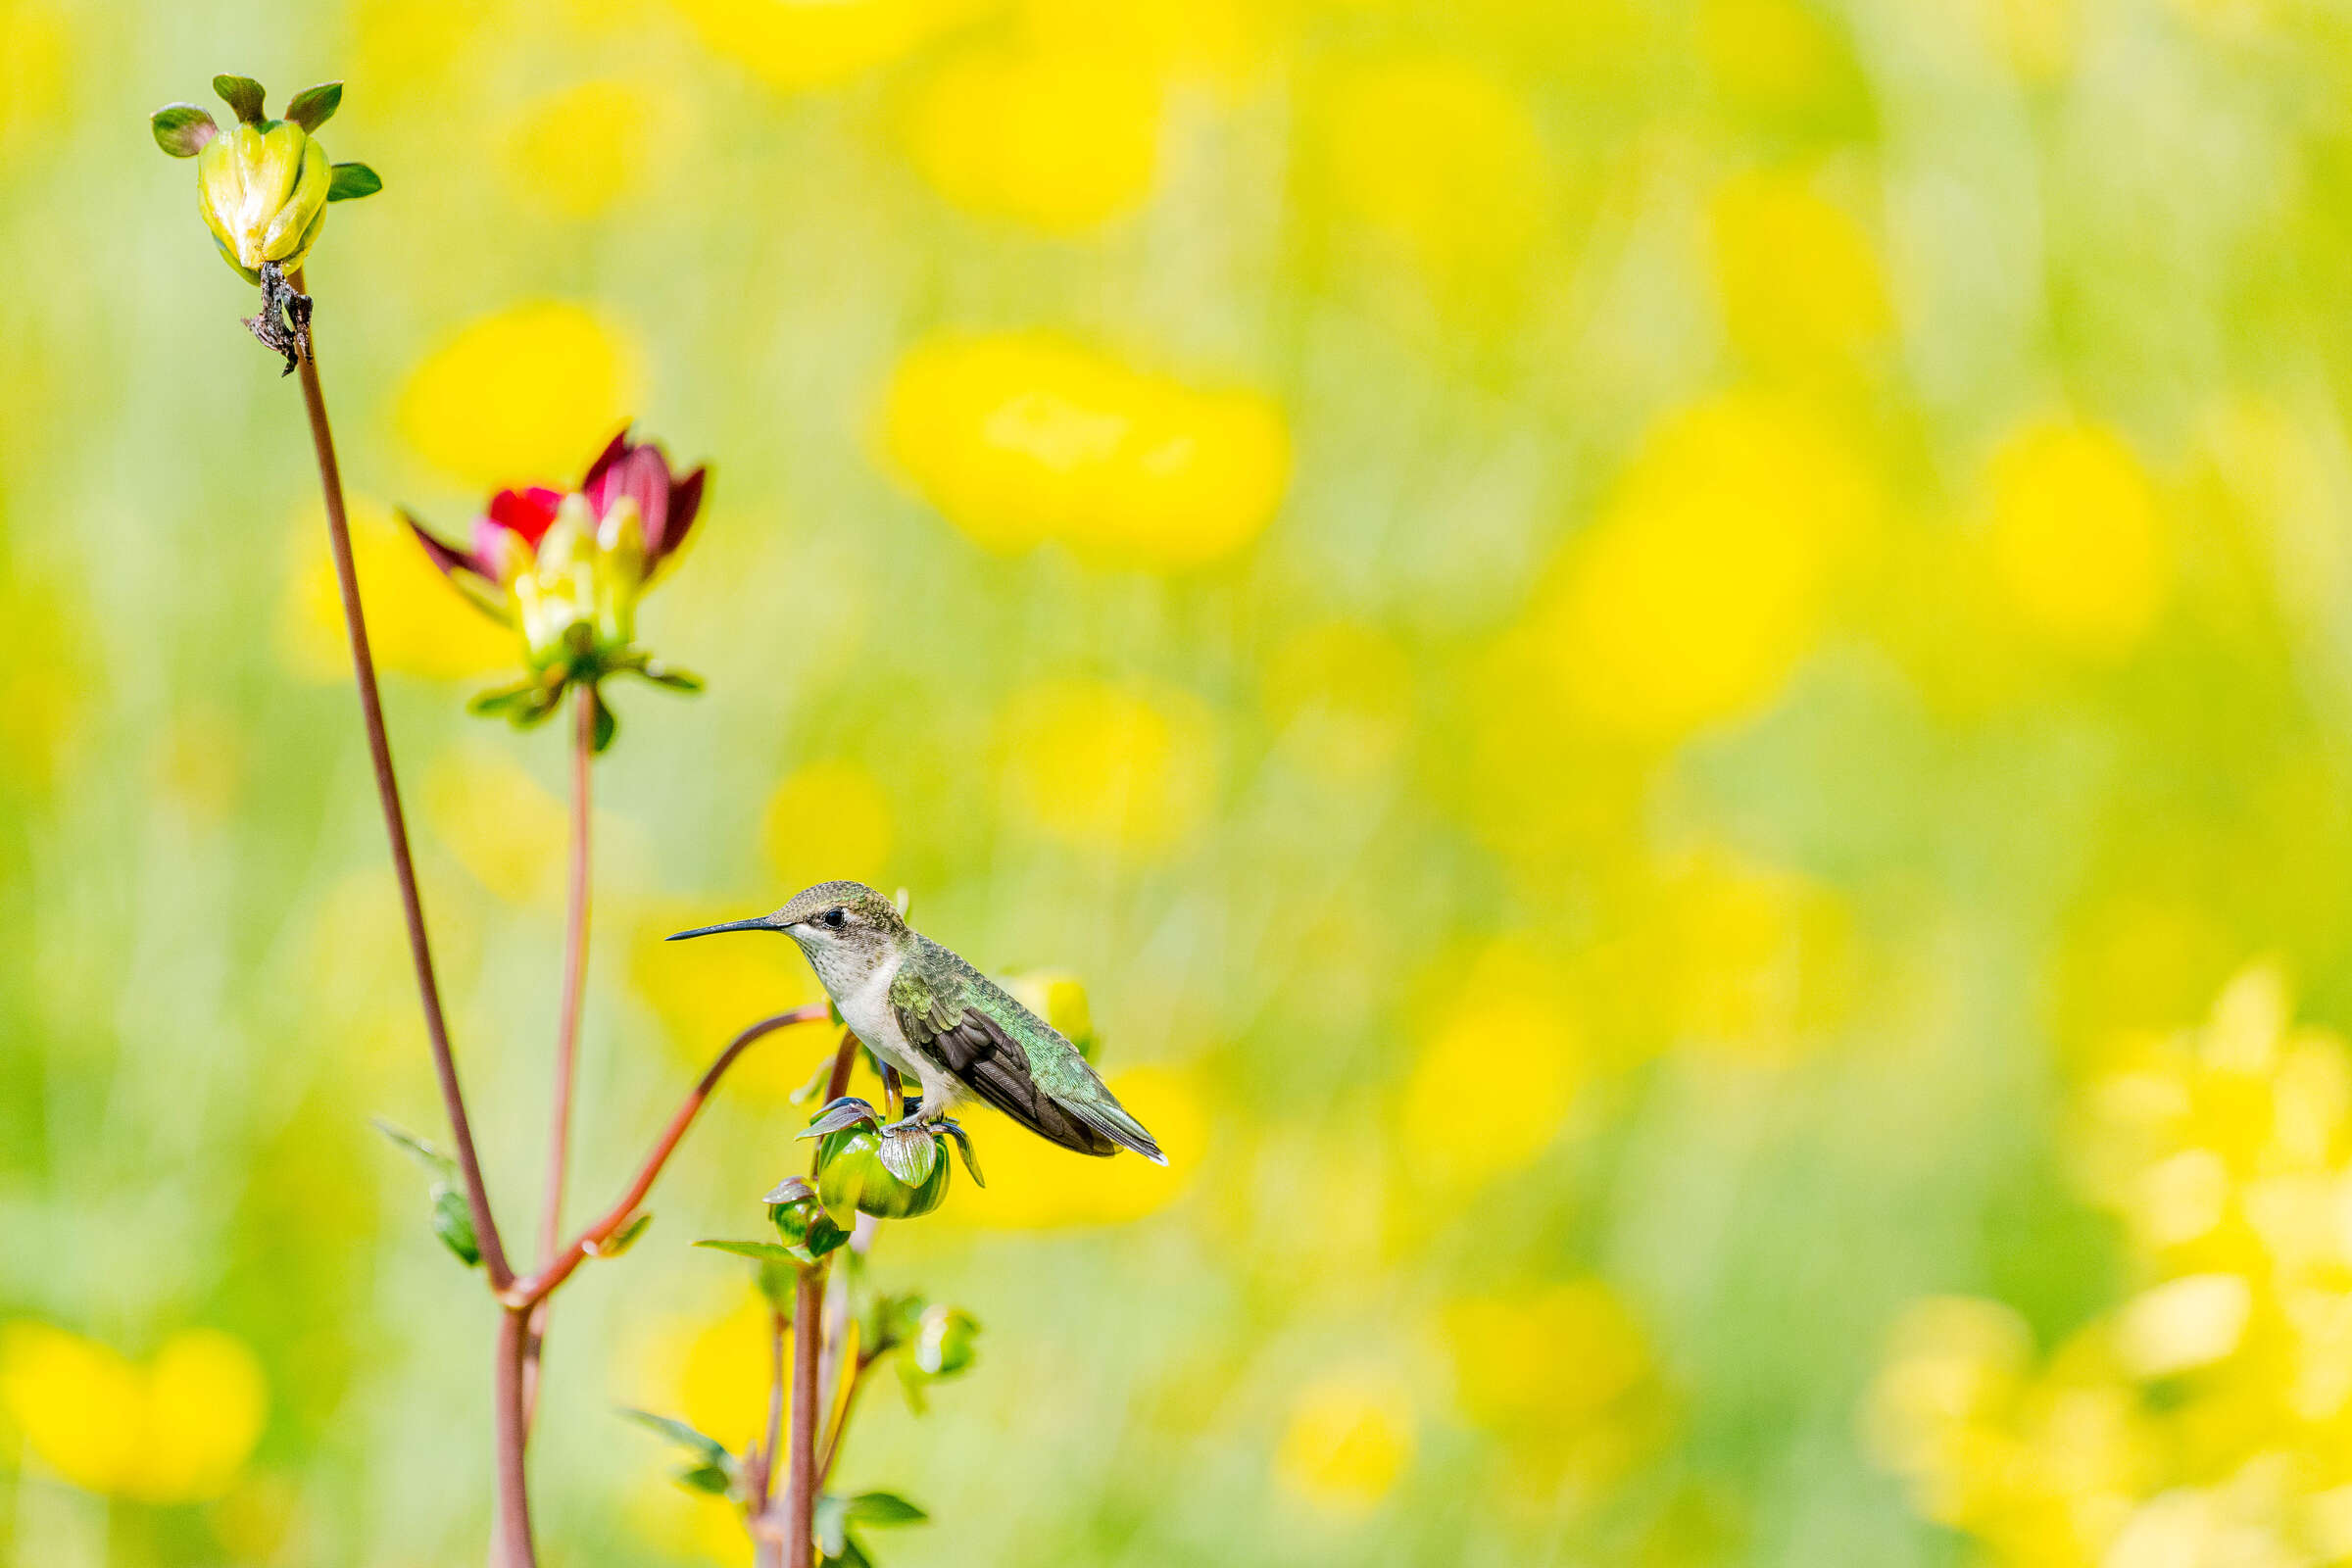 A single hummingbird takes a break on a flower stem, with dozens of bright yellow flowers in the background